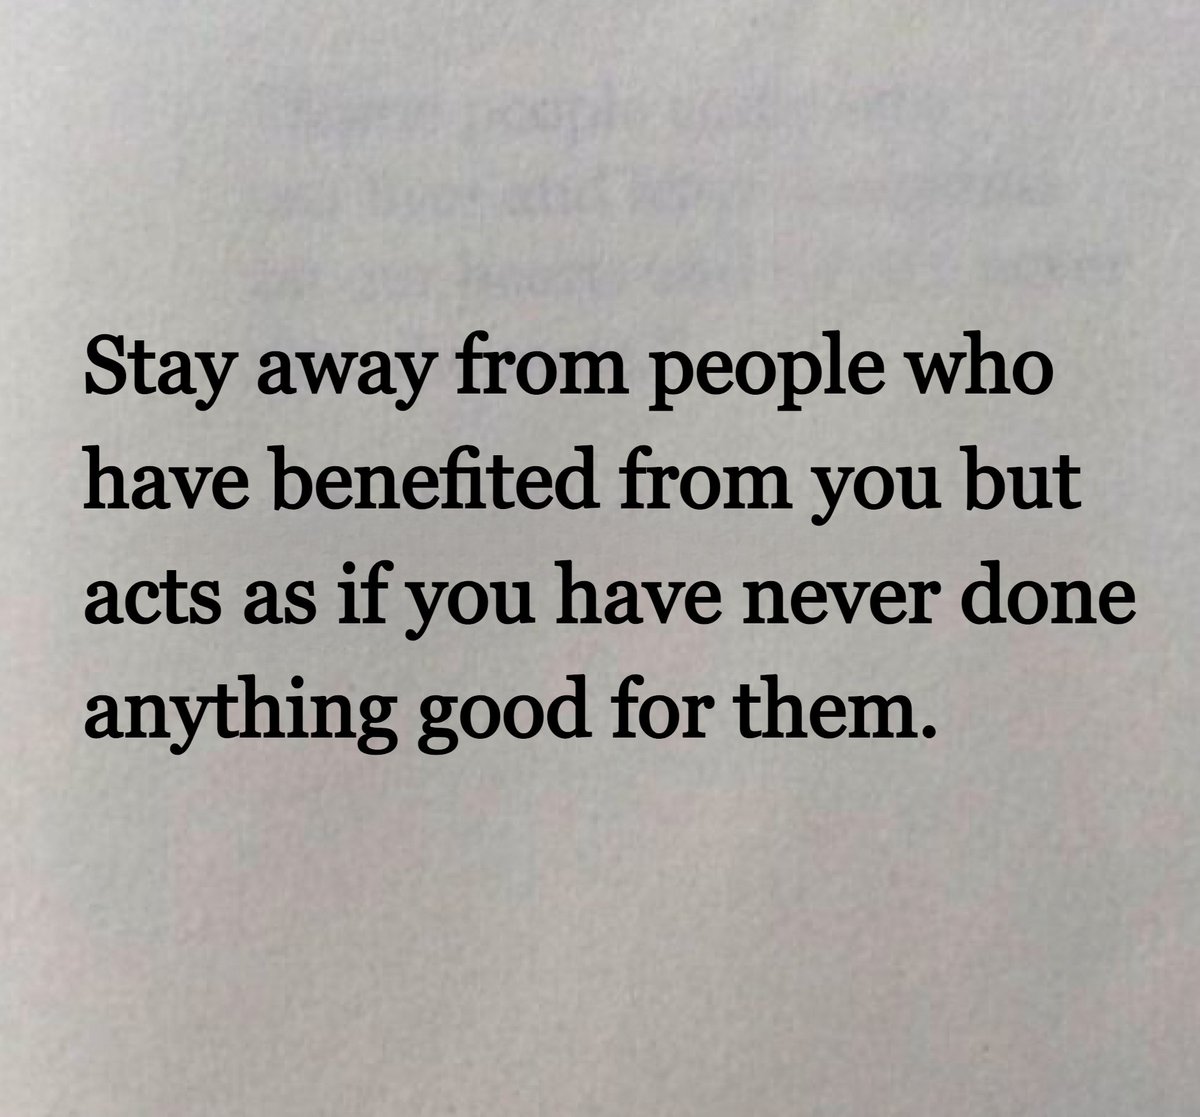 Stay away from negative people.